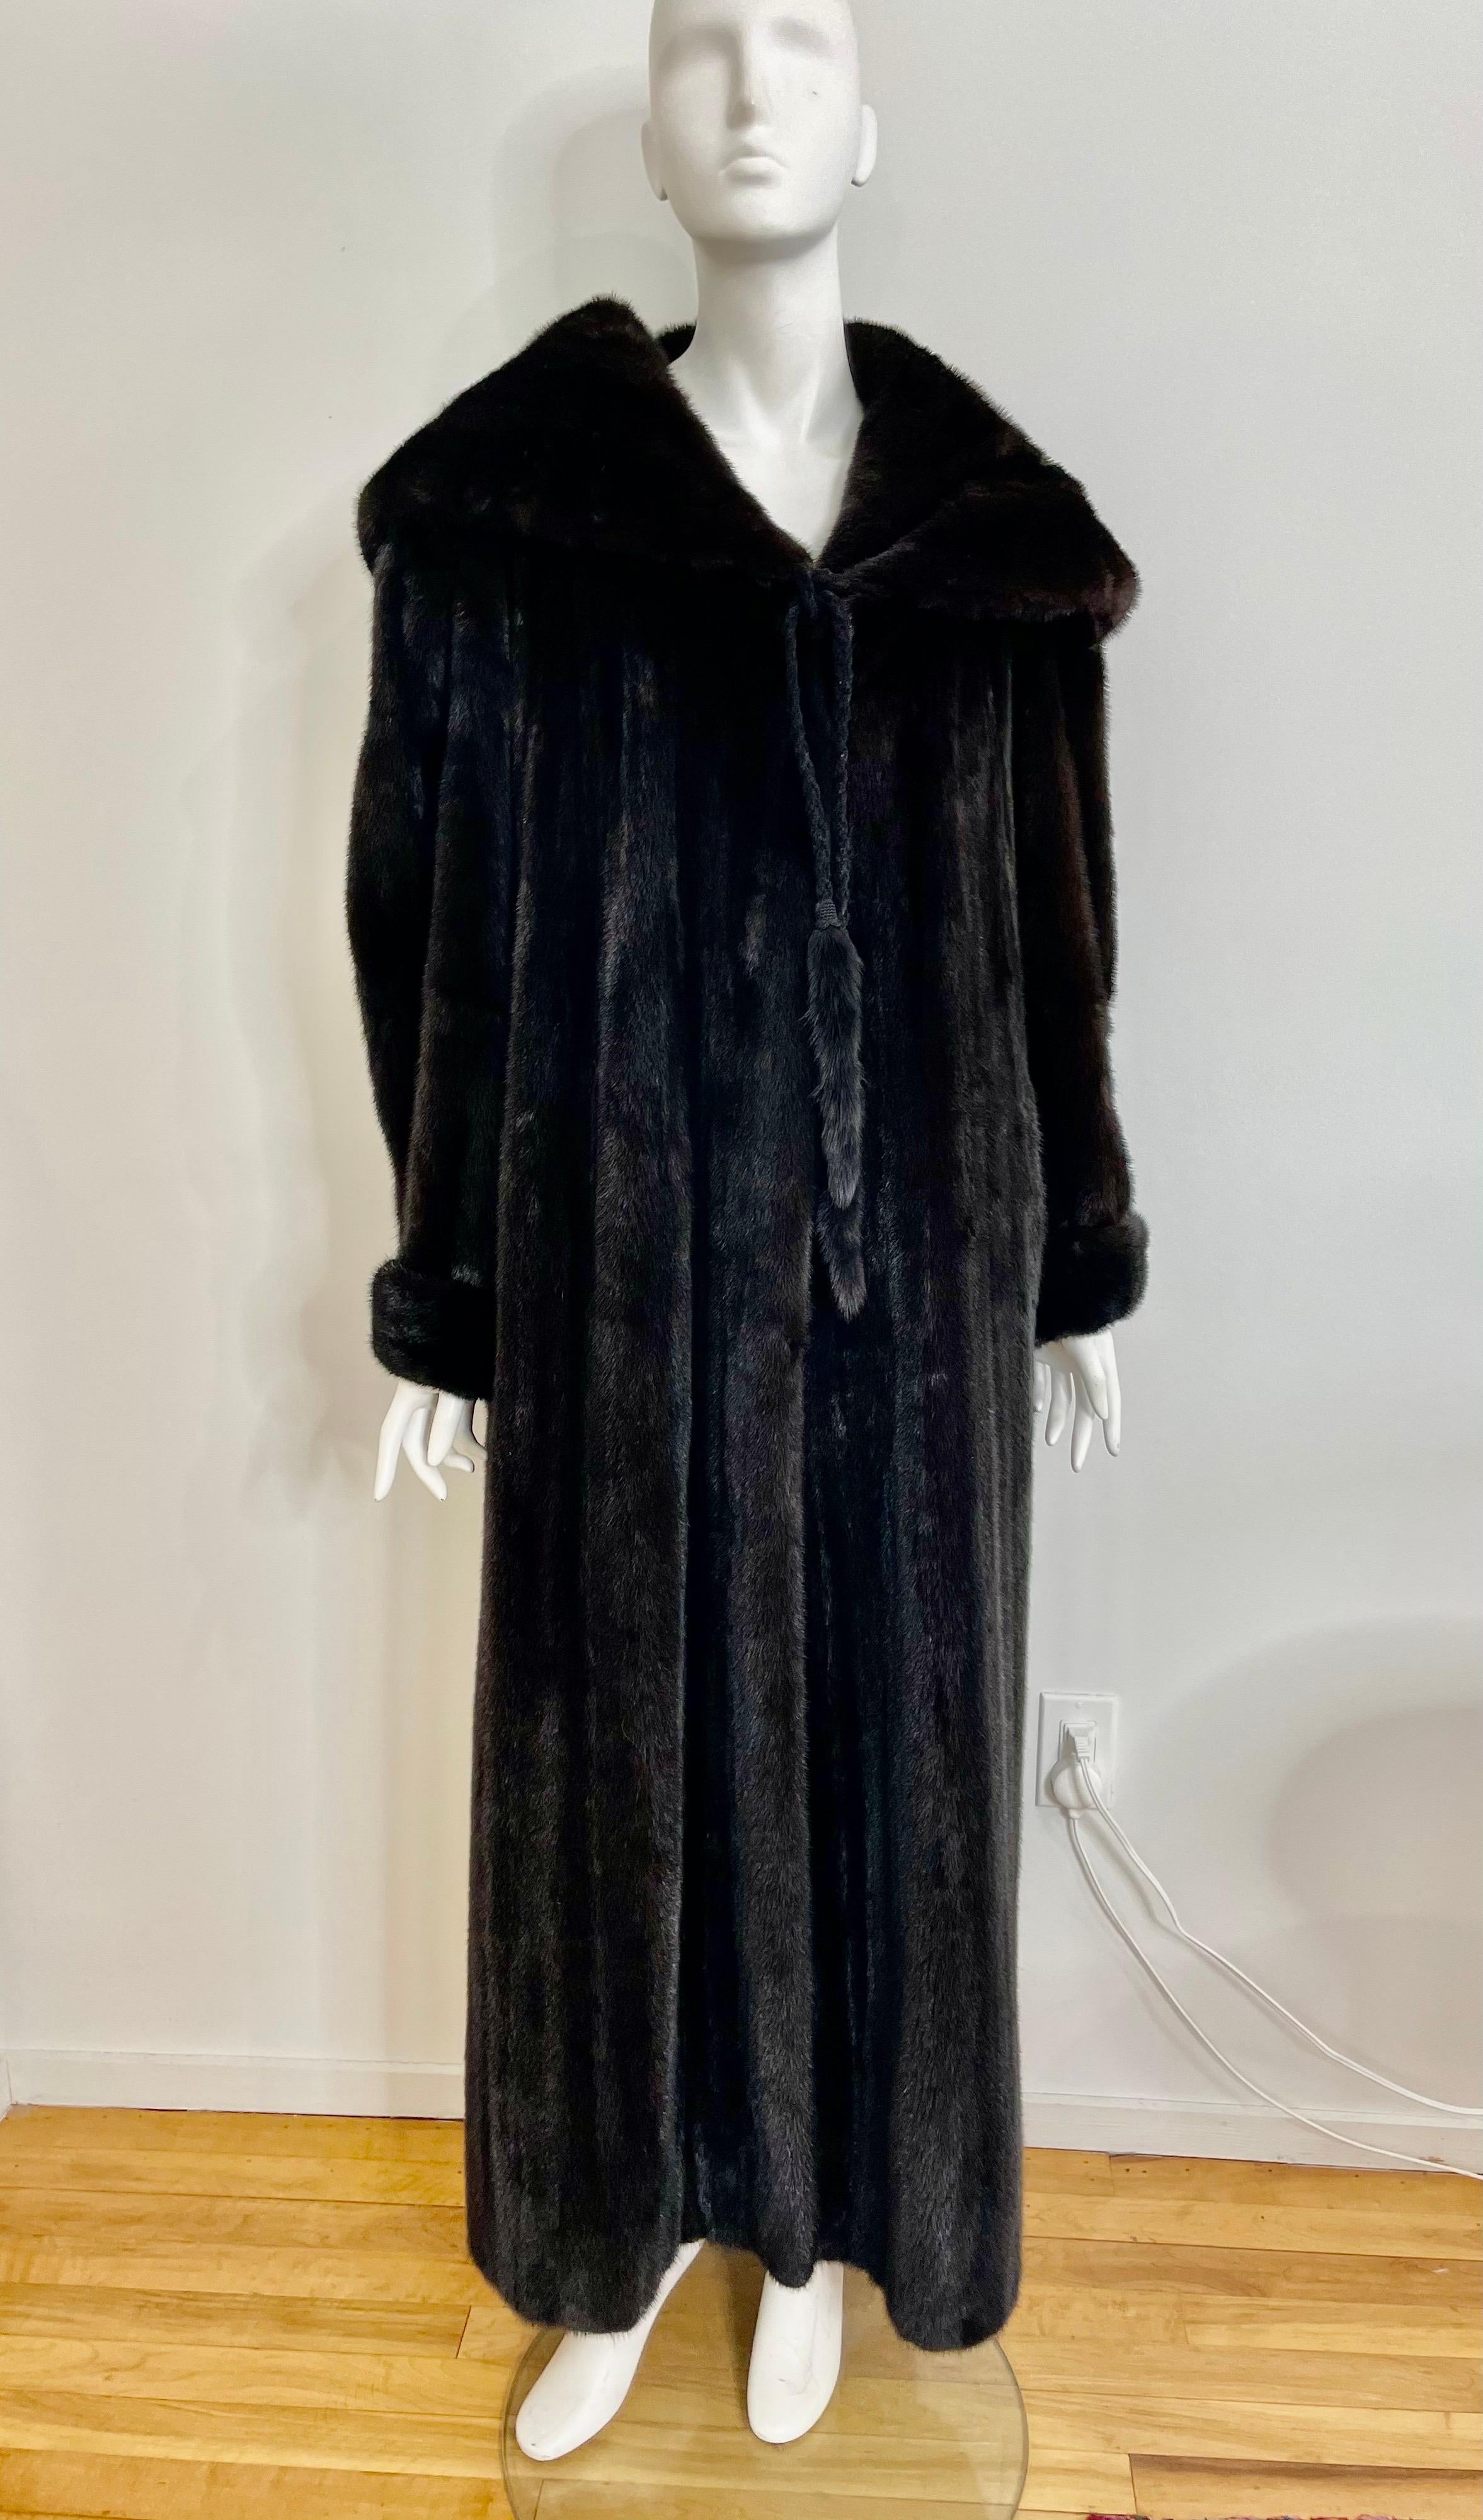 This coat is absolutely stunning. Deep almost Black Mink, with a massive collar. The collar may double as a hood depending on your neck. 3 Clip closures as well as a tassel tie front. Slit pockets. This is labeled a size 8 but will fit up to a 14